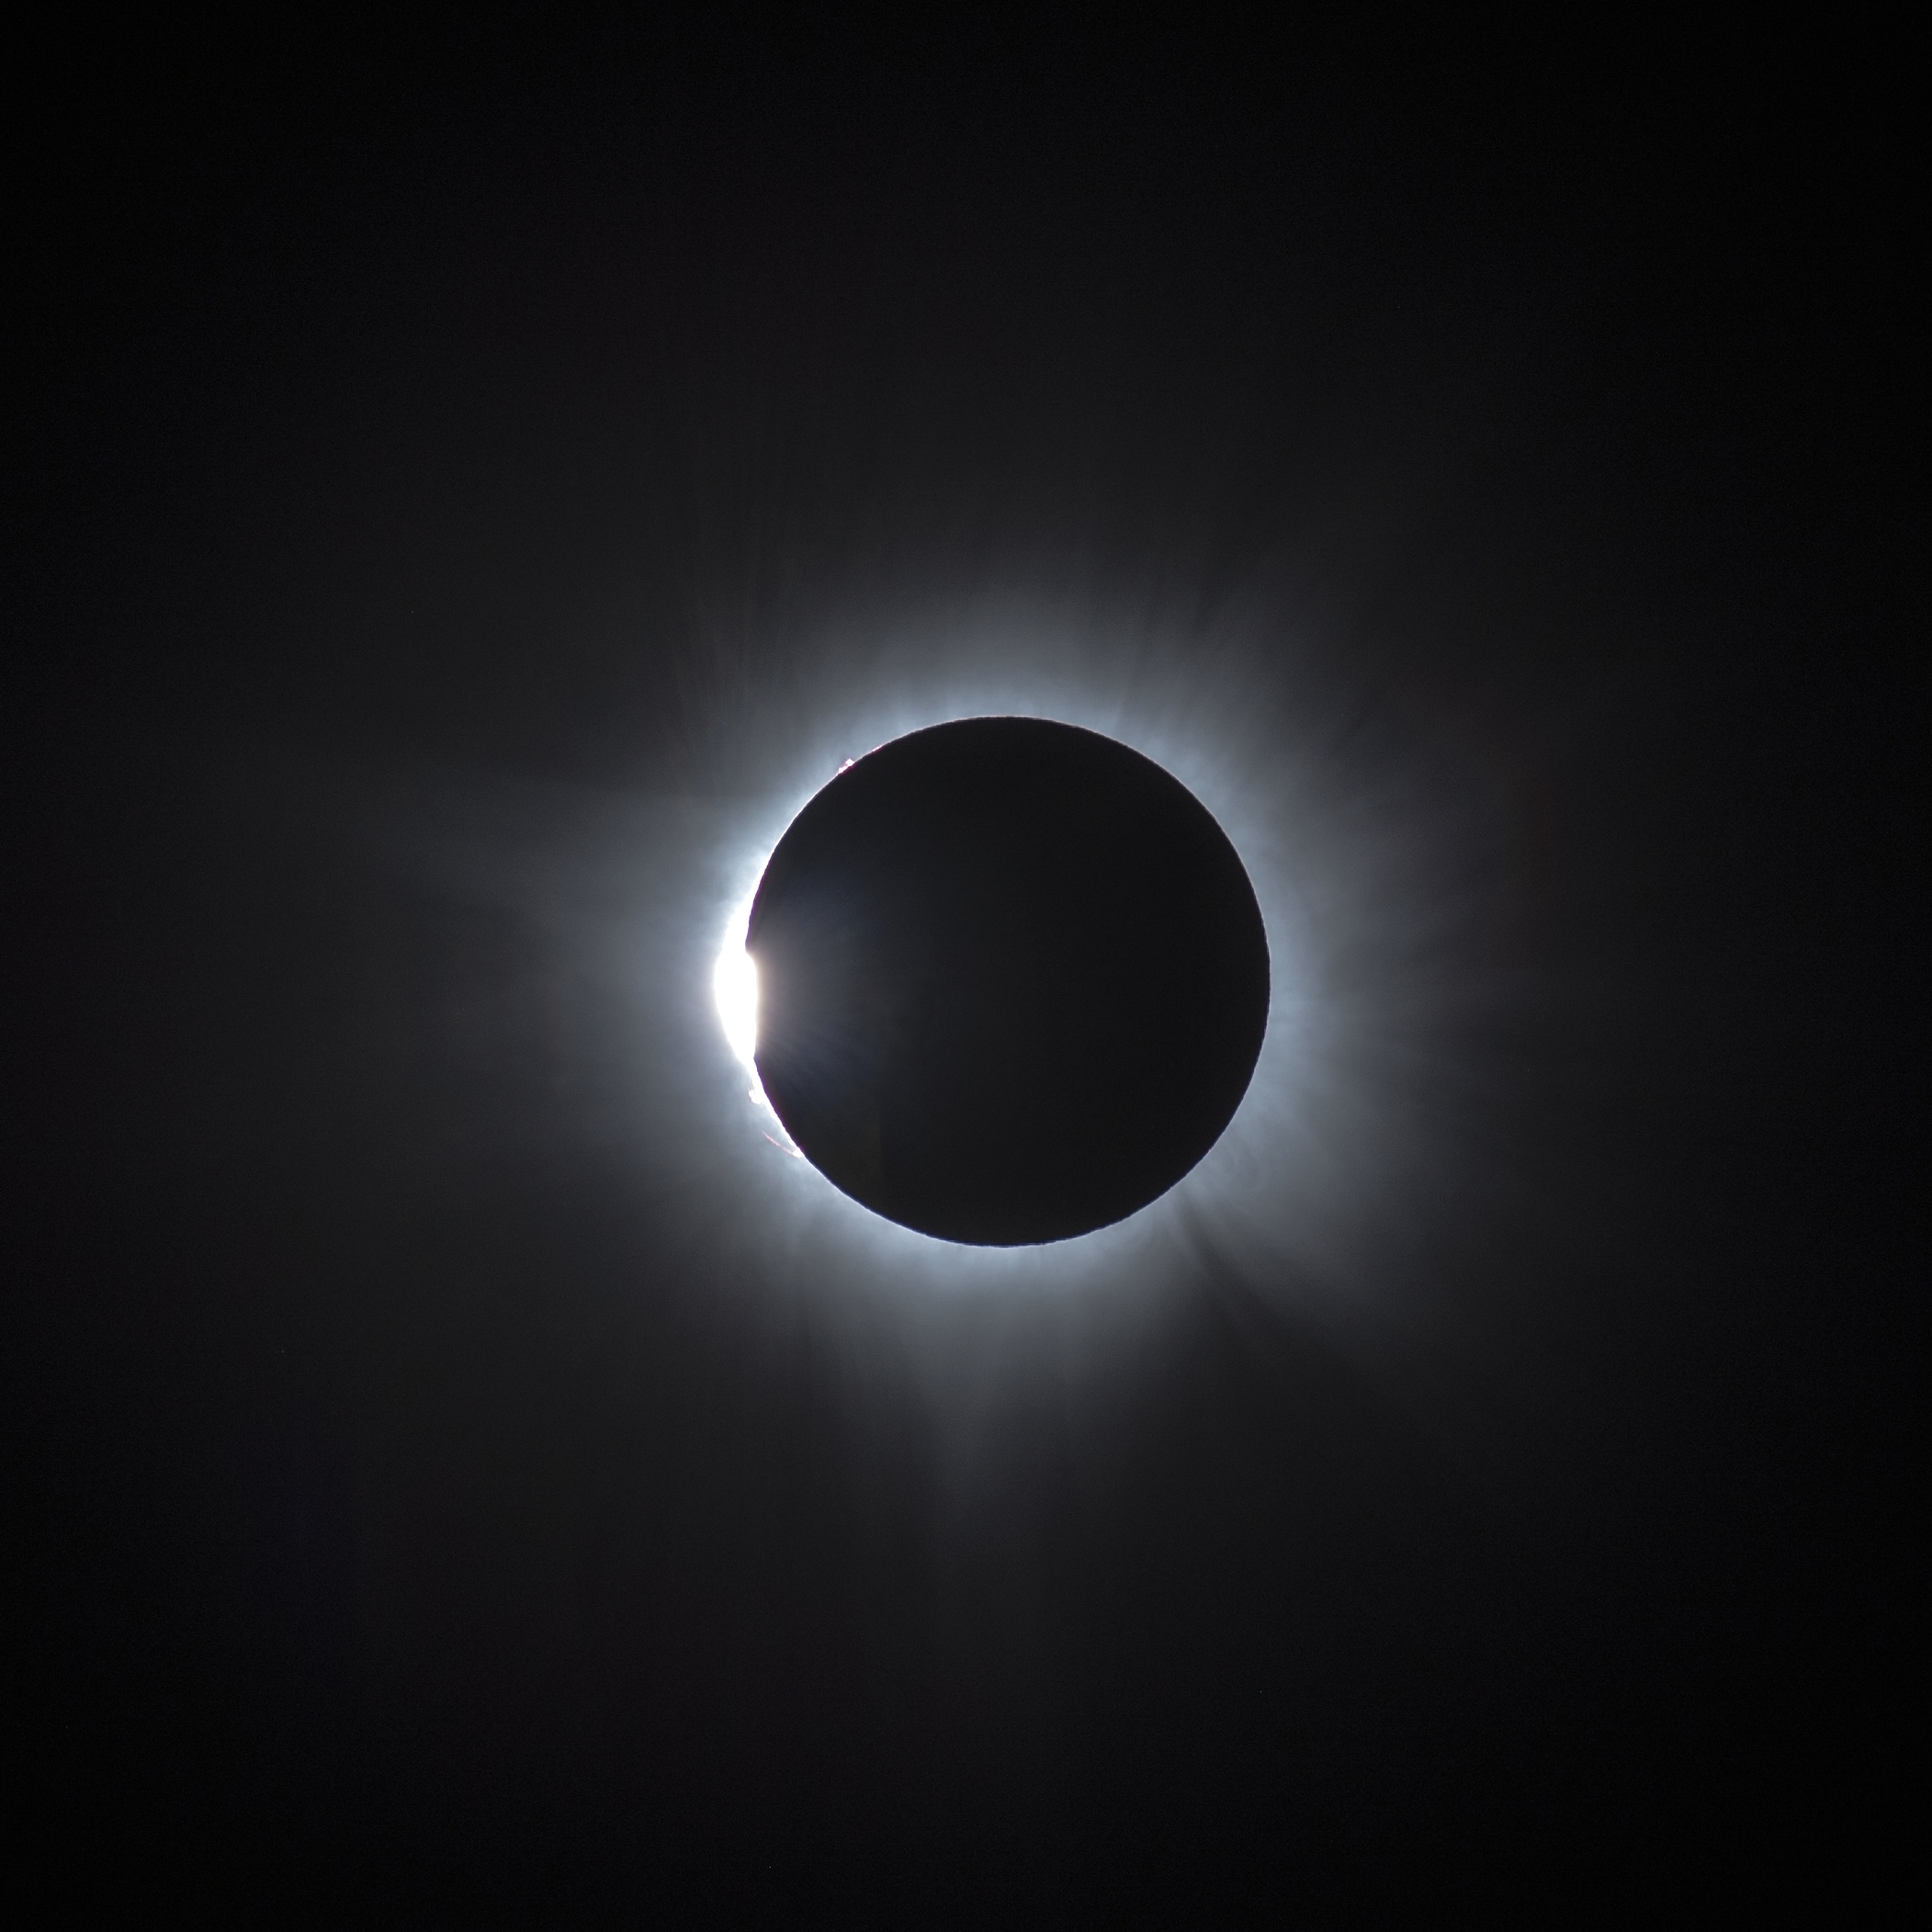 A straight-on view of eclipse totality. A silver ring in a dark sky, with a flare of round light on the lower left part of the ring.